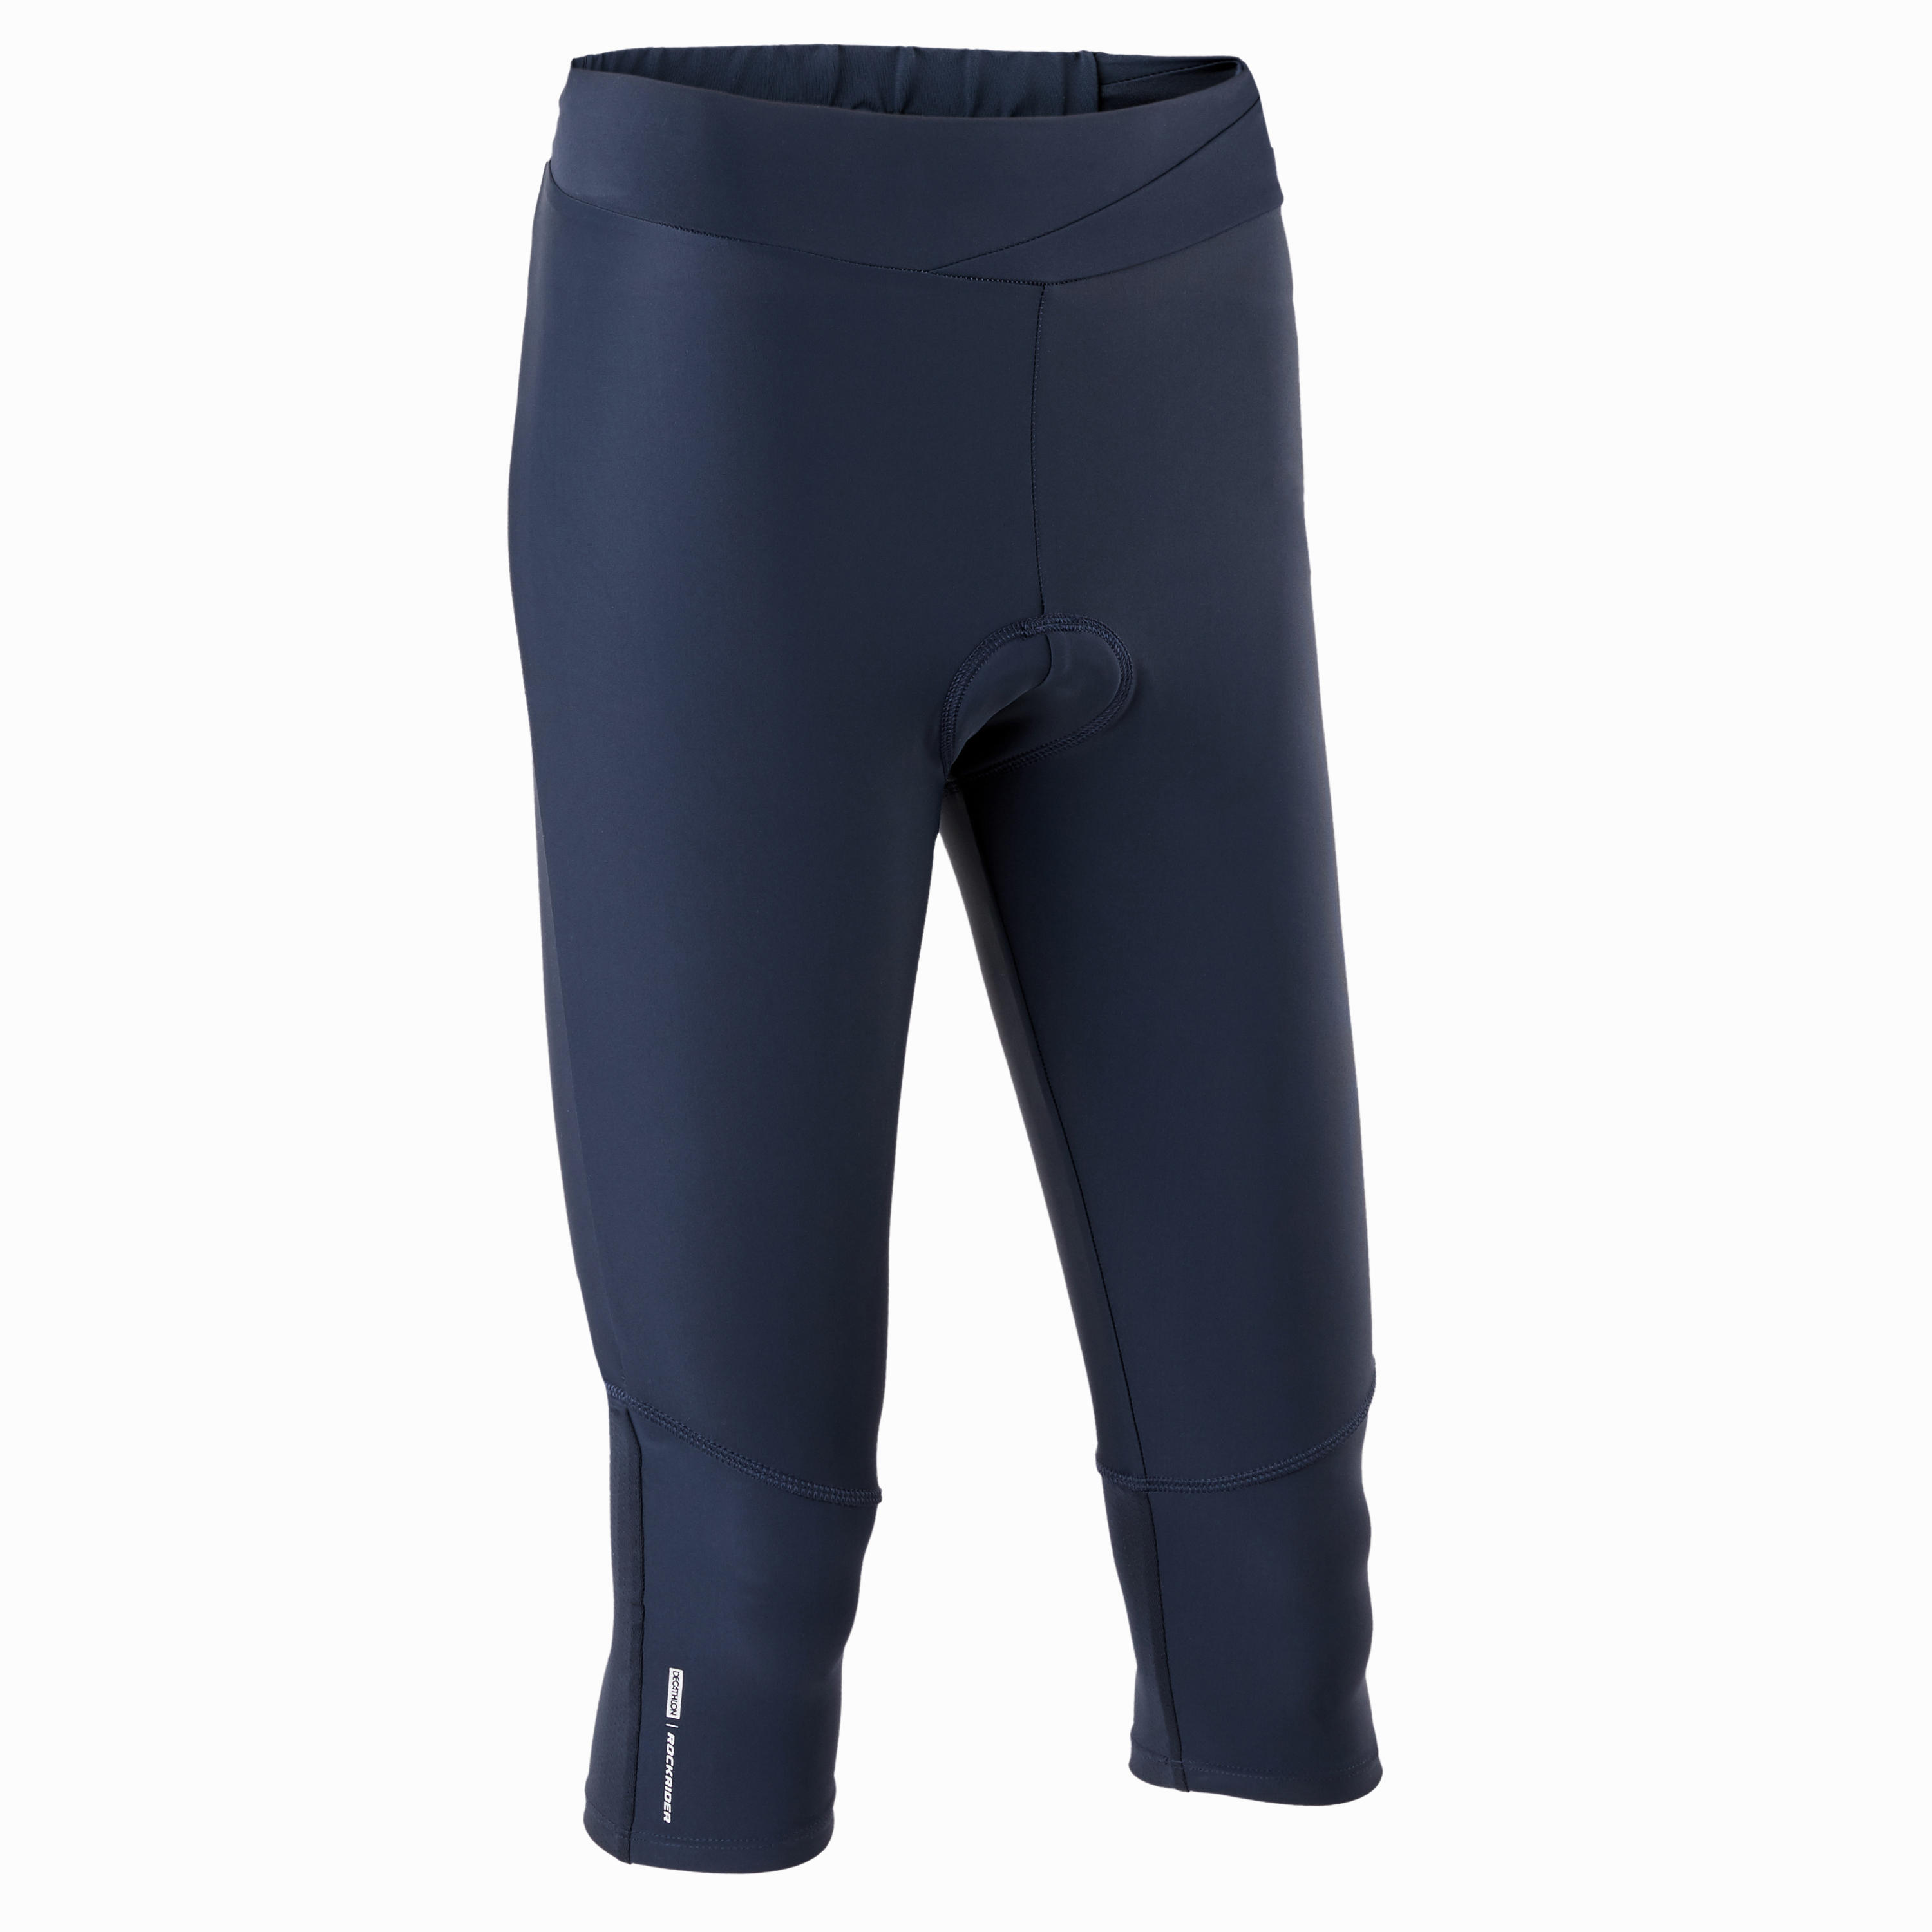 Top more than 92 cycling trousers decathlon super hot - in.cdgdbentre